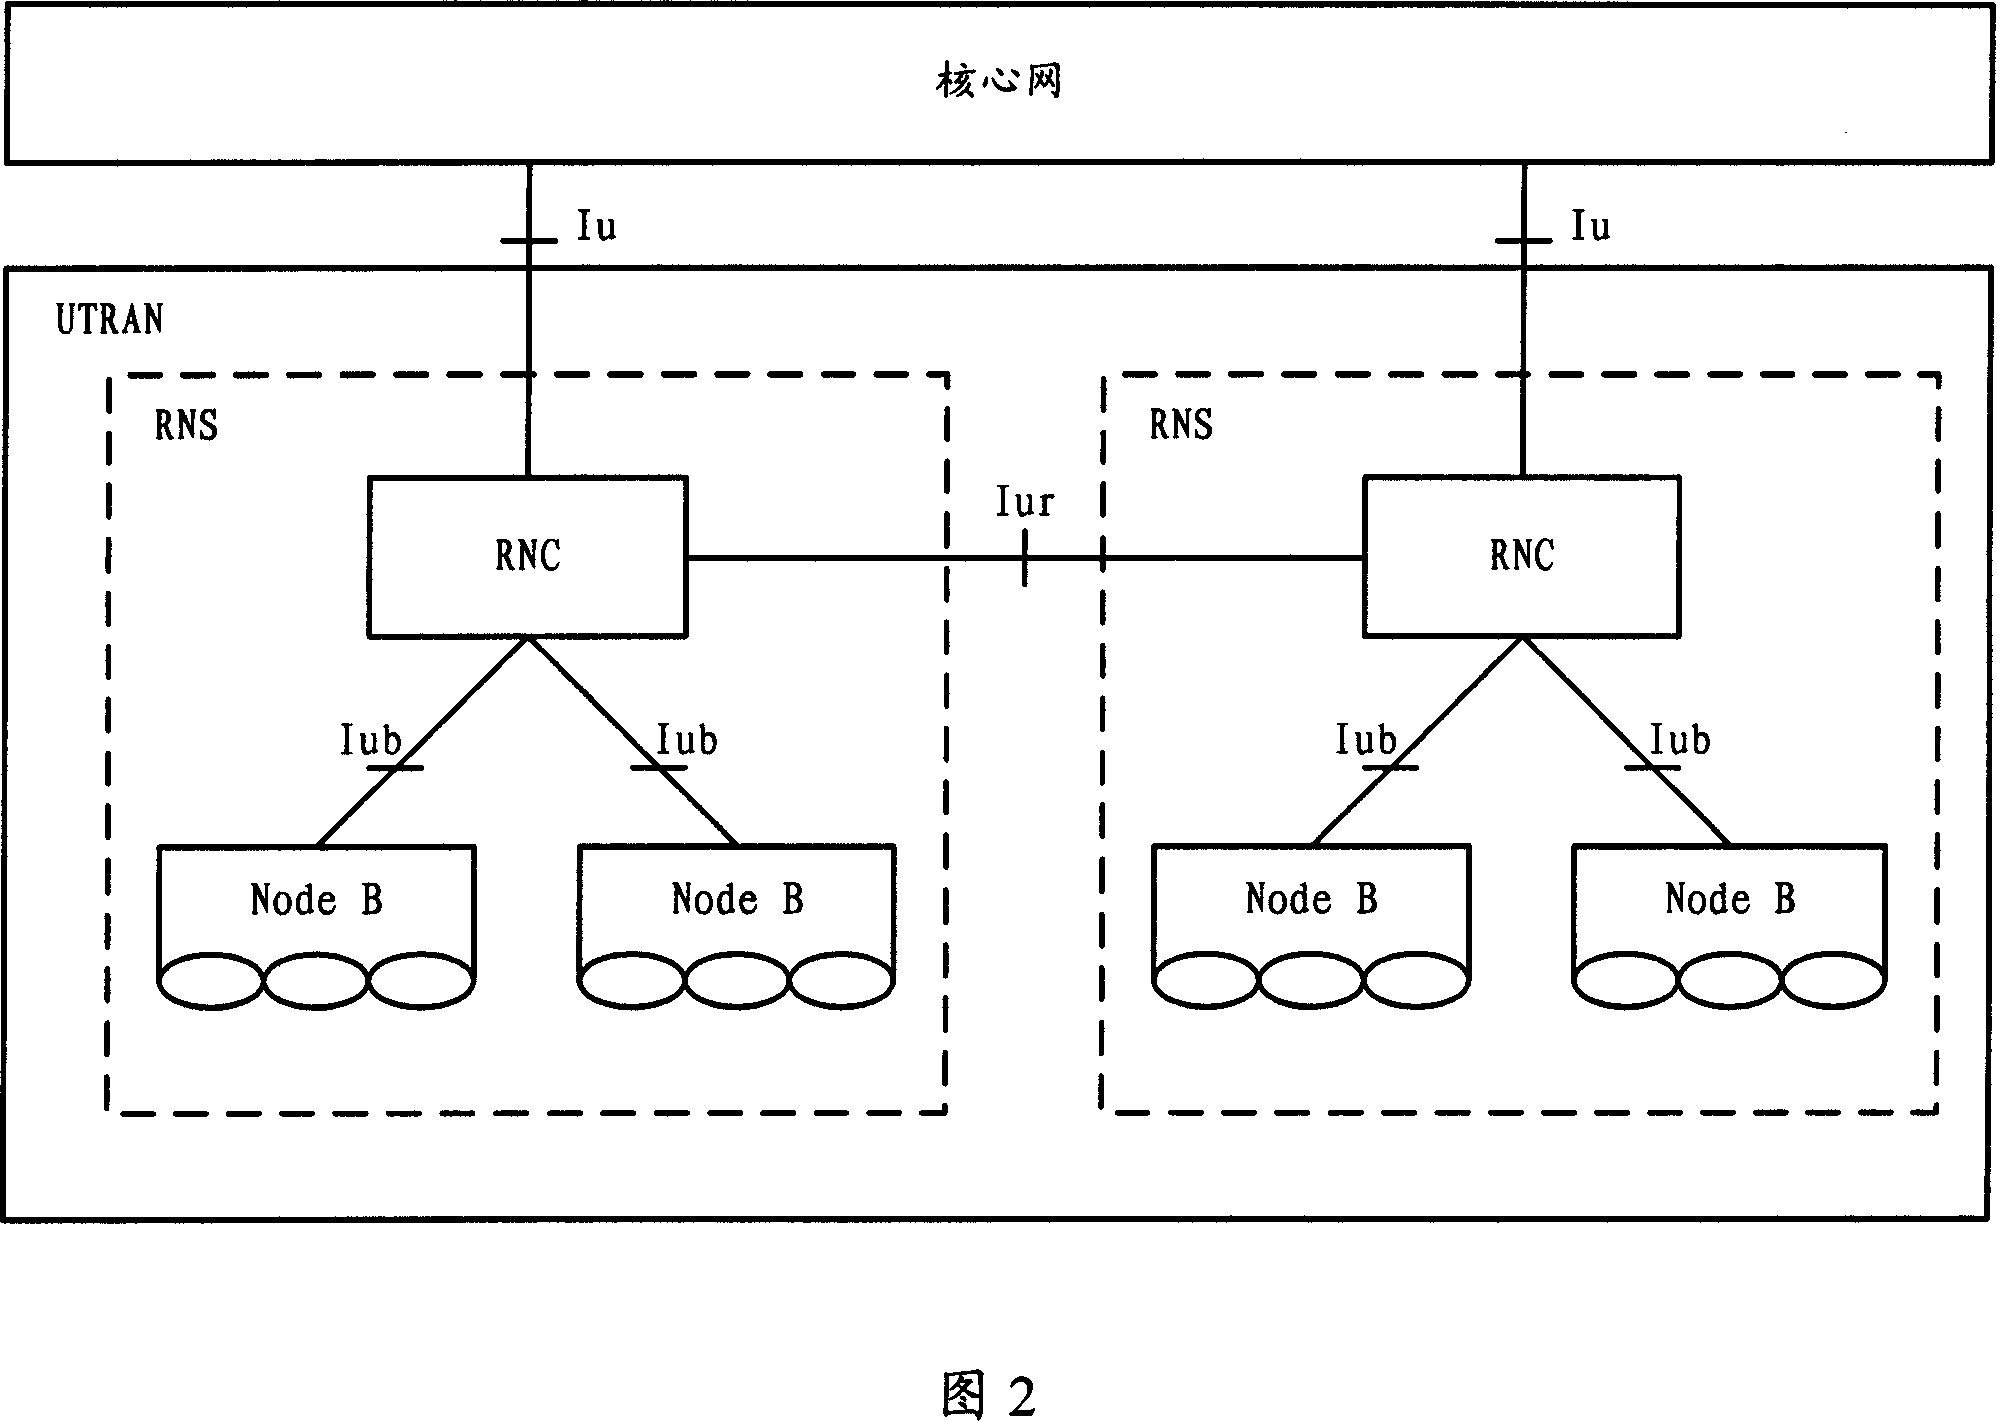 Signal detection method of the channel in the E-DCH